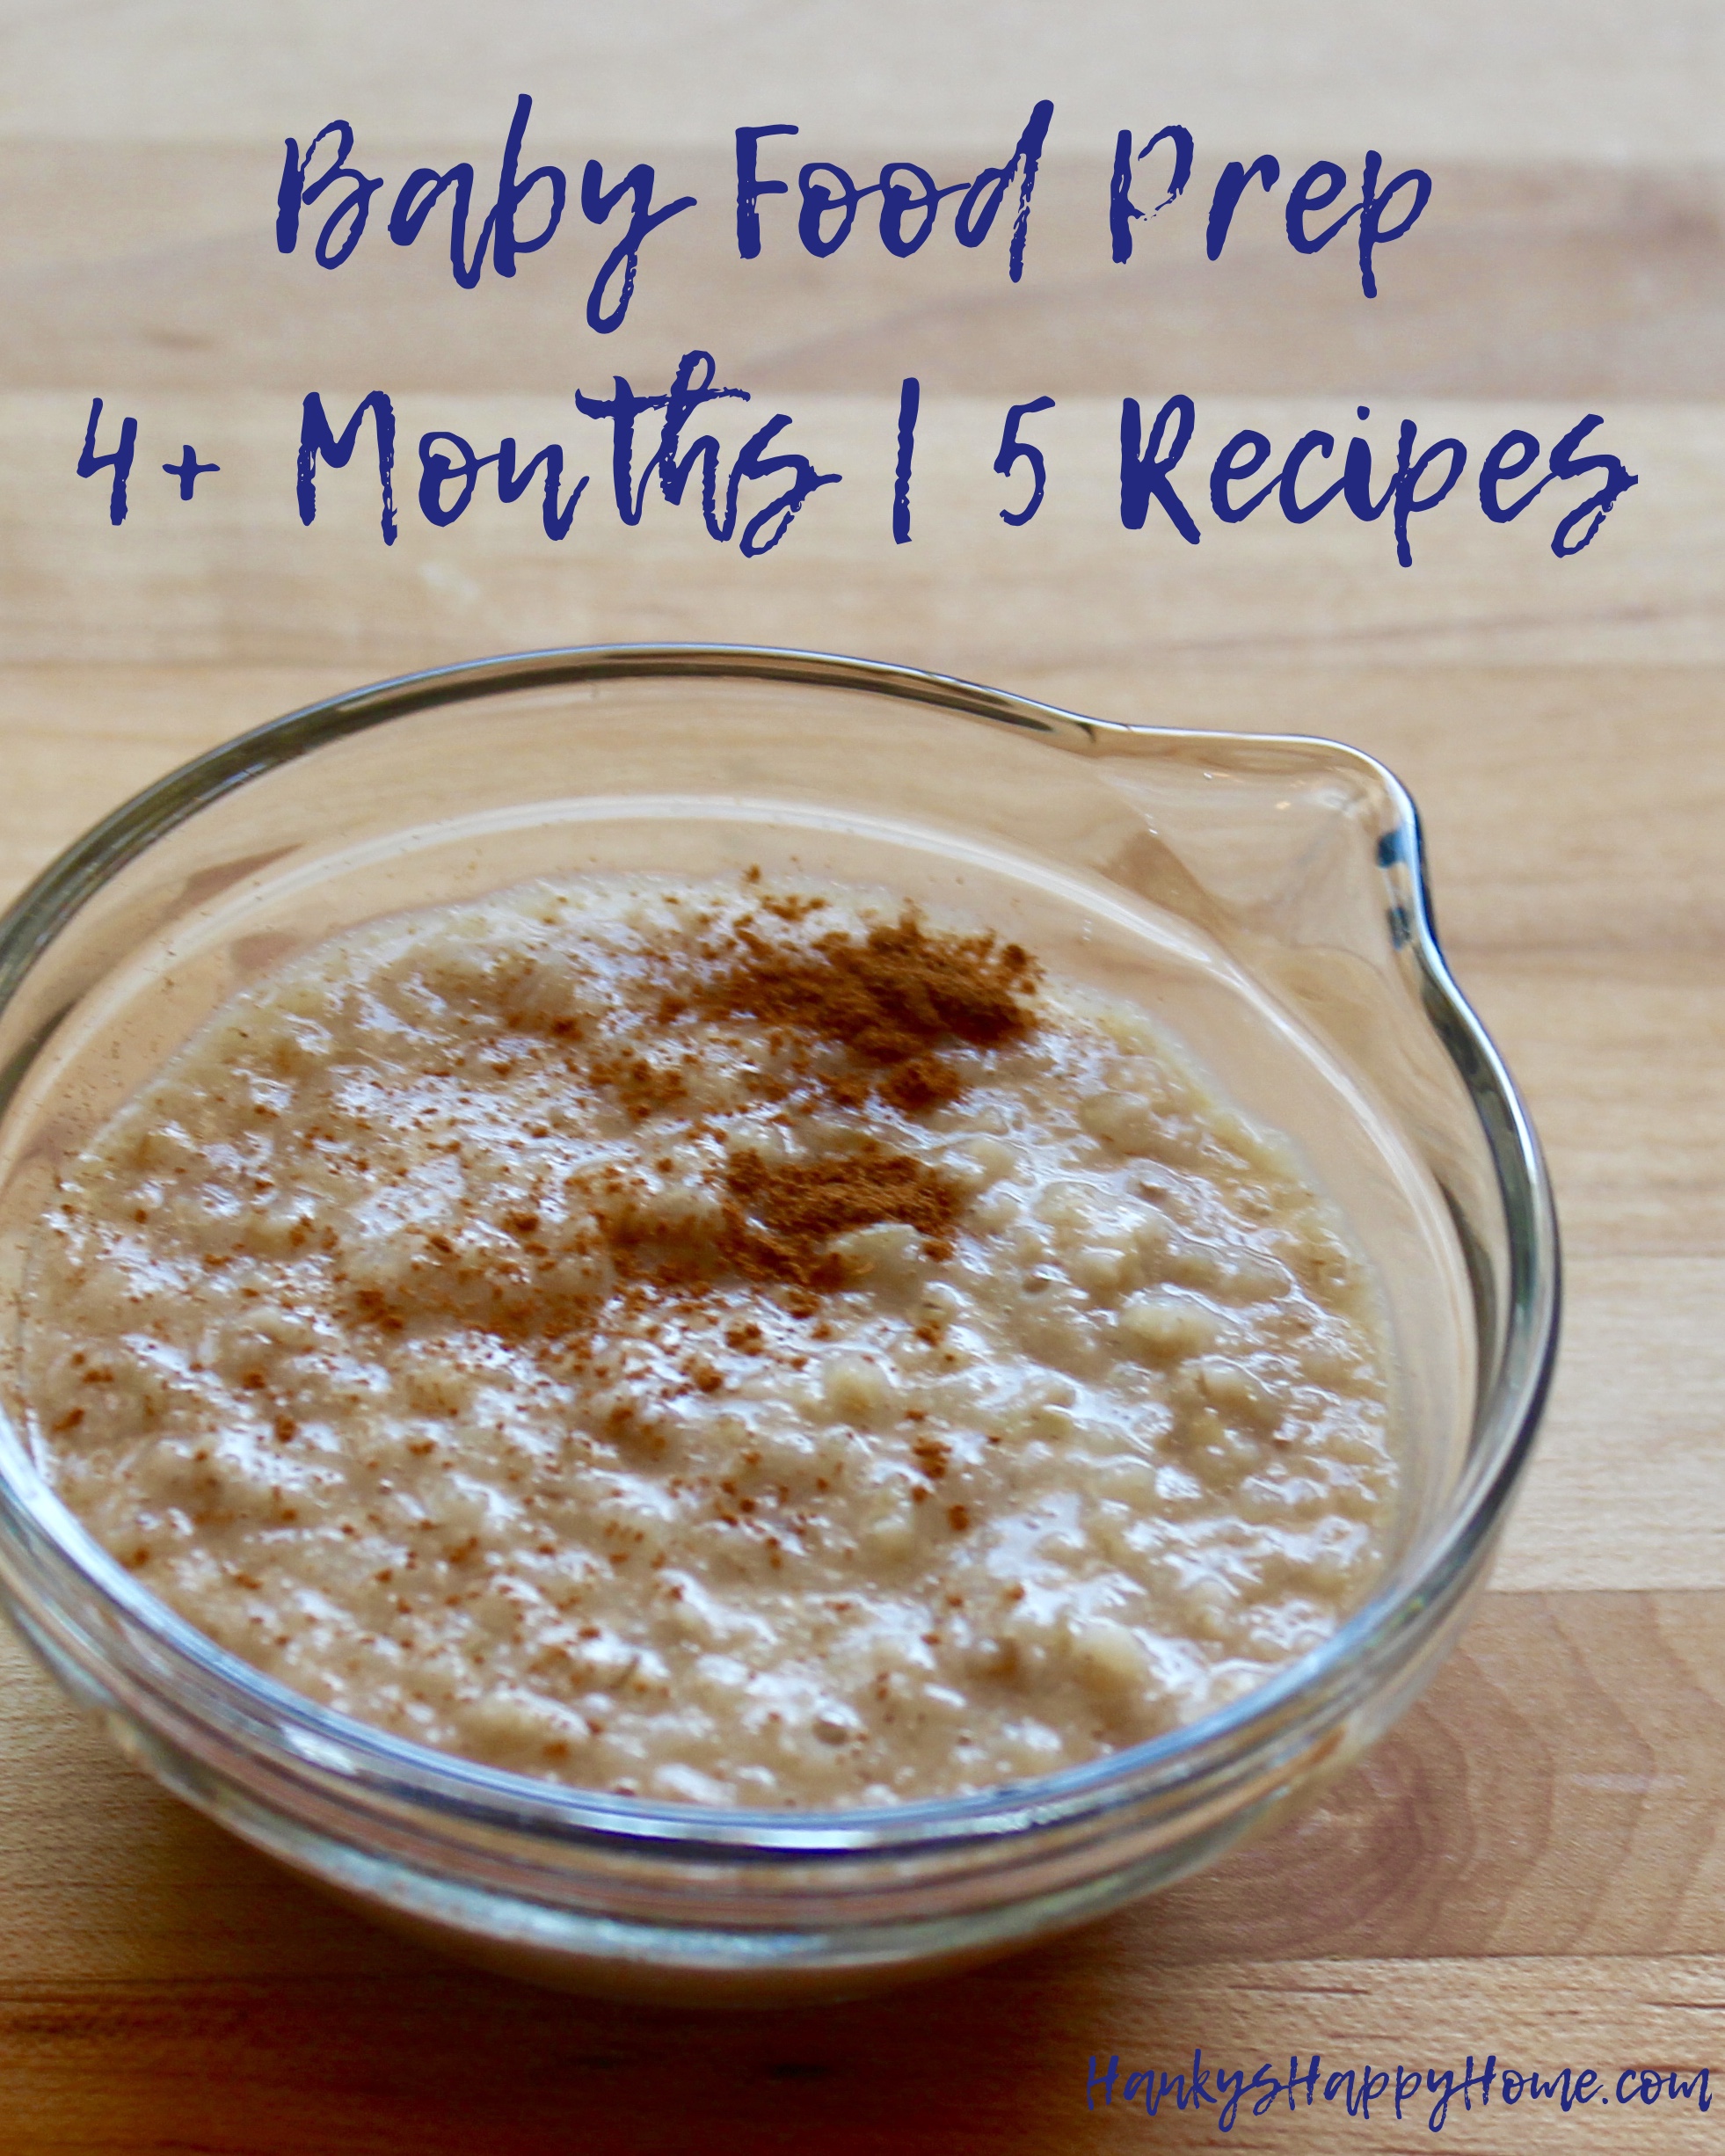 Baby Food Prep | 4+ Months | 5 Recipes | Hanky's Happy Home